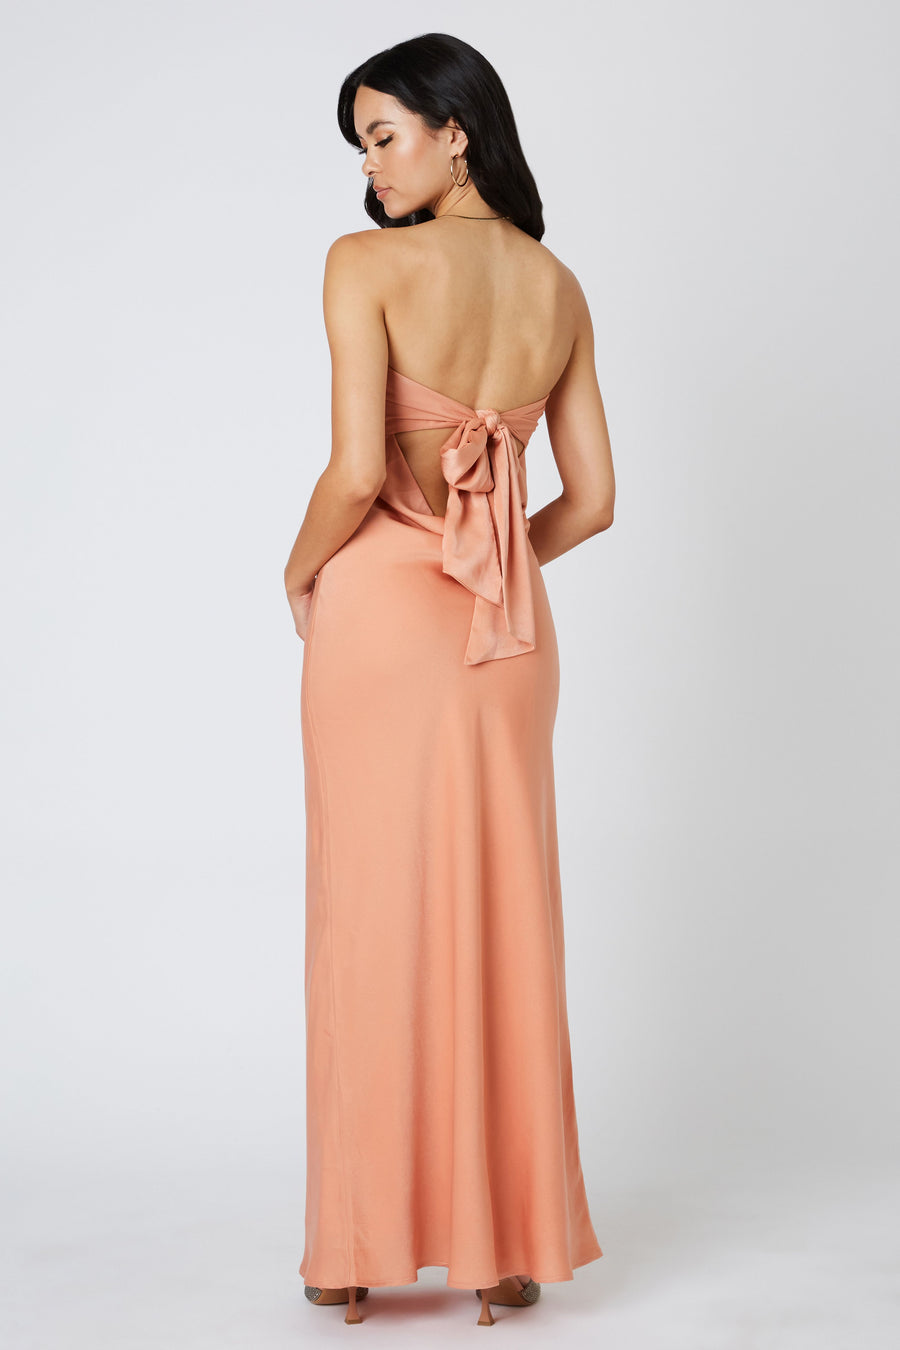 Strapless maxi dress in the color canyon.